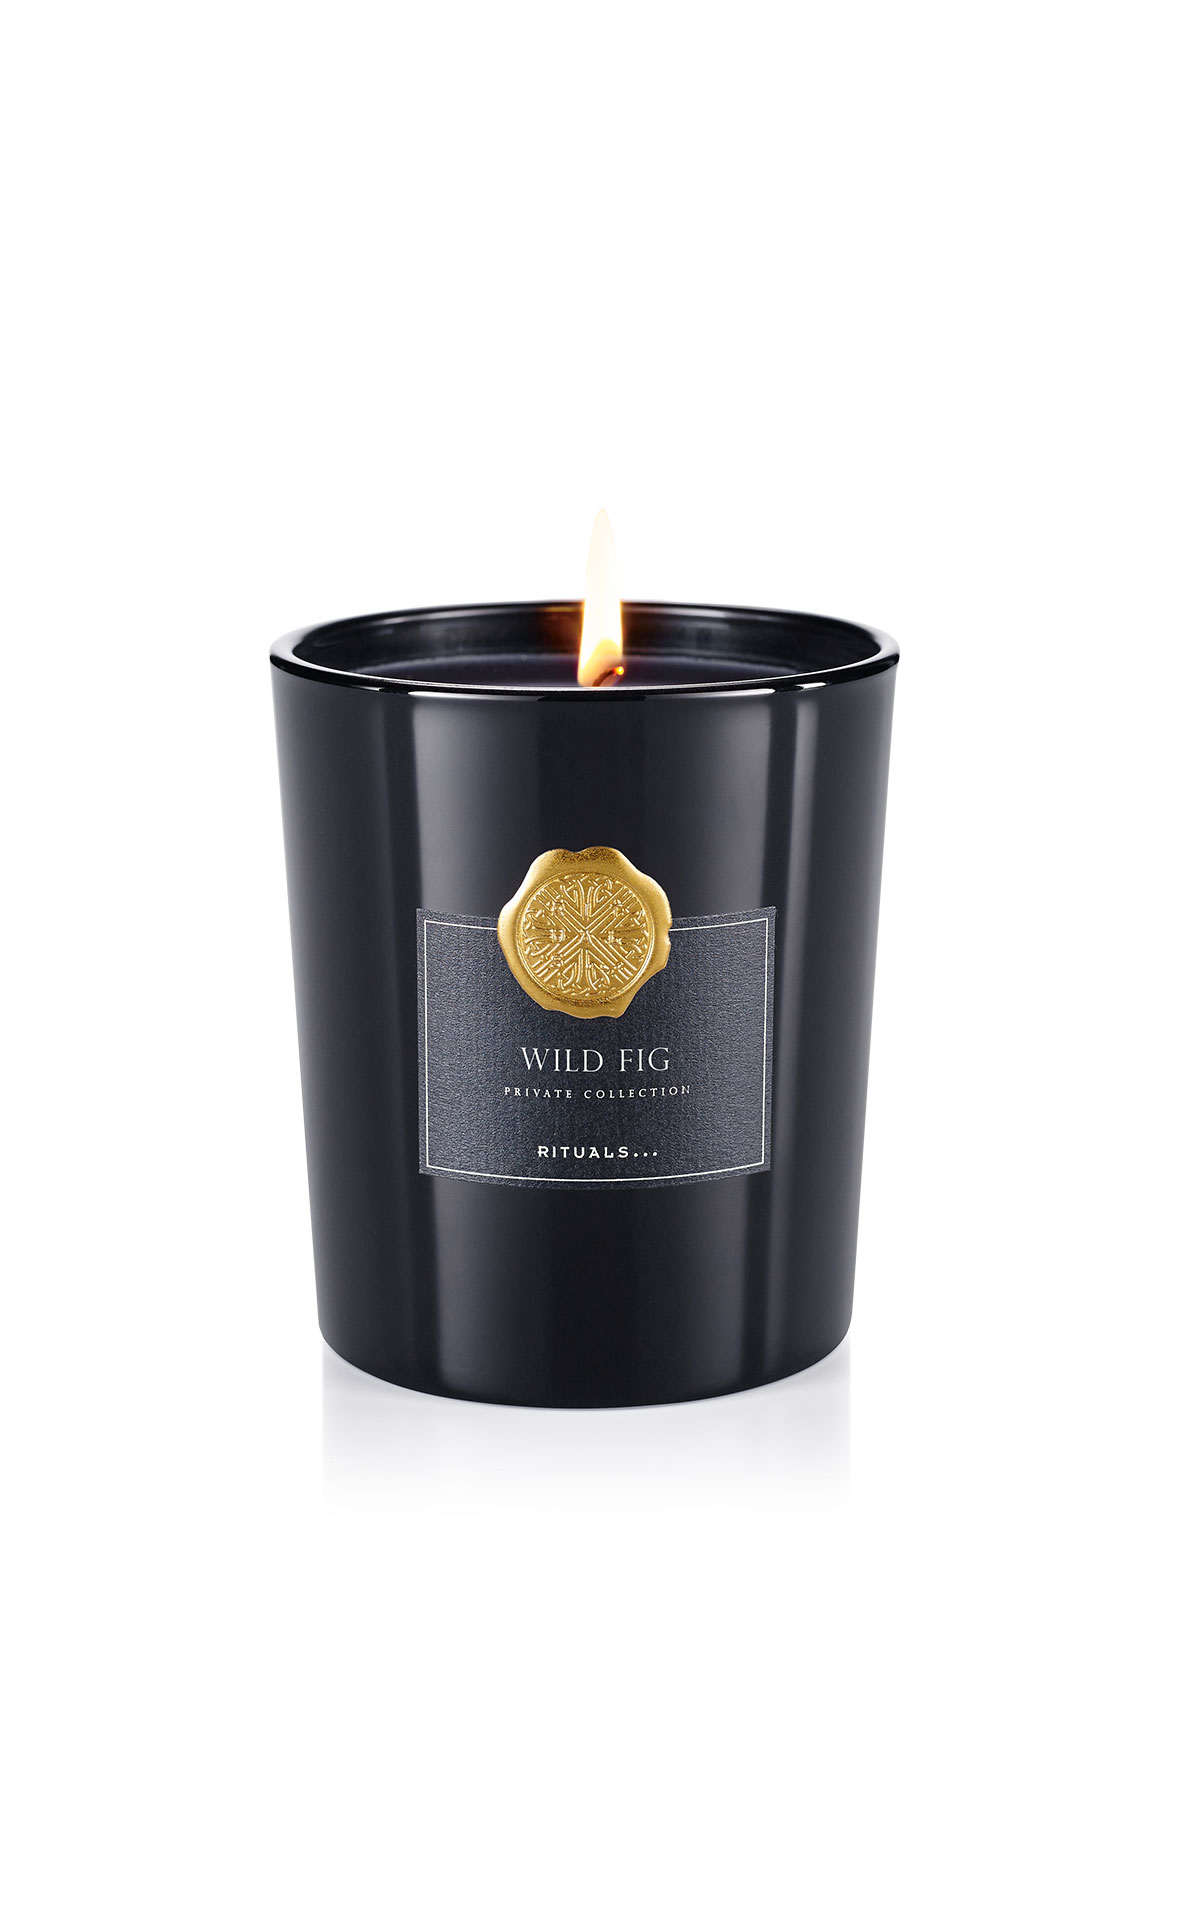 Rituals Private collection - wild fig scented candle from Bicester Village